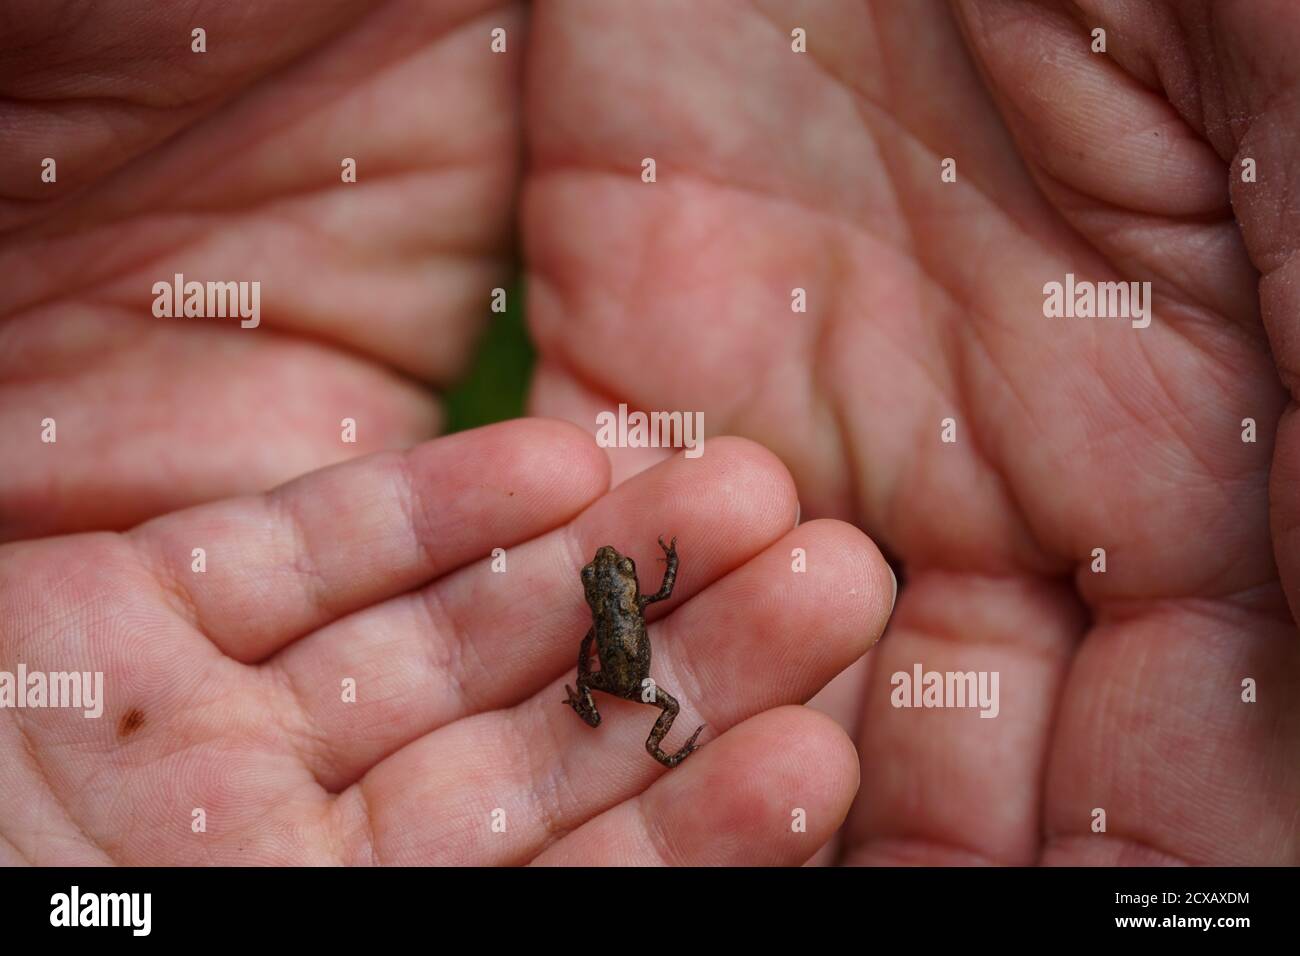 Tiny frog crawling on child's fingers, parent's hands underneath Stock Photo